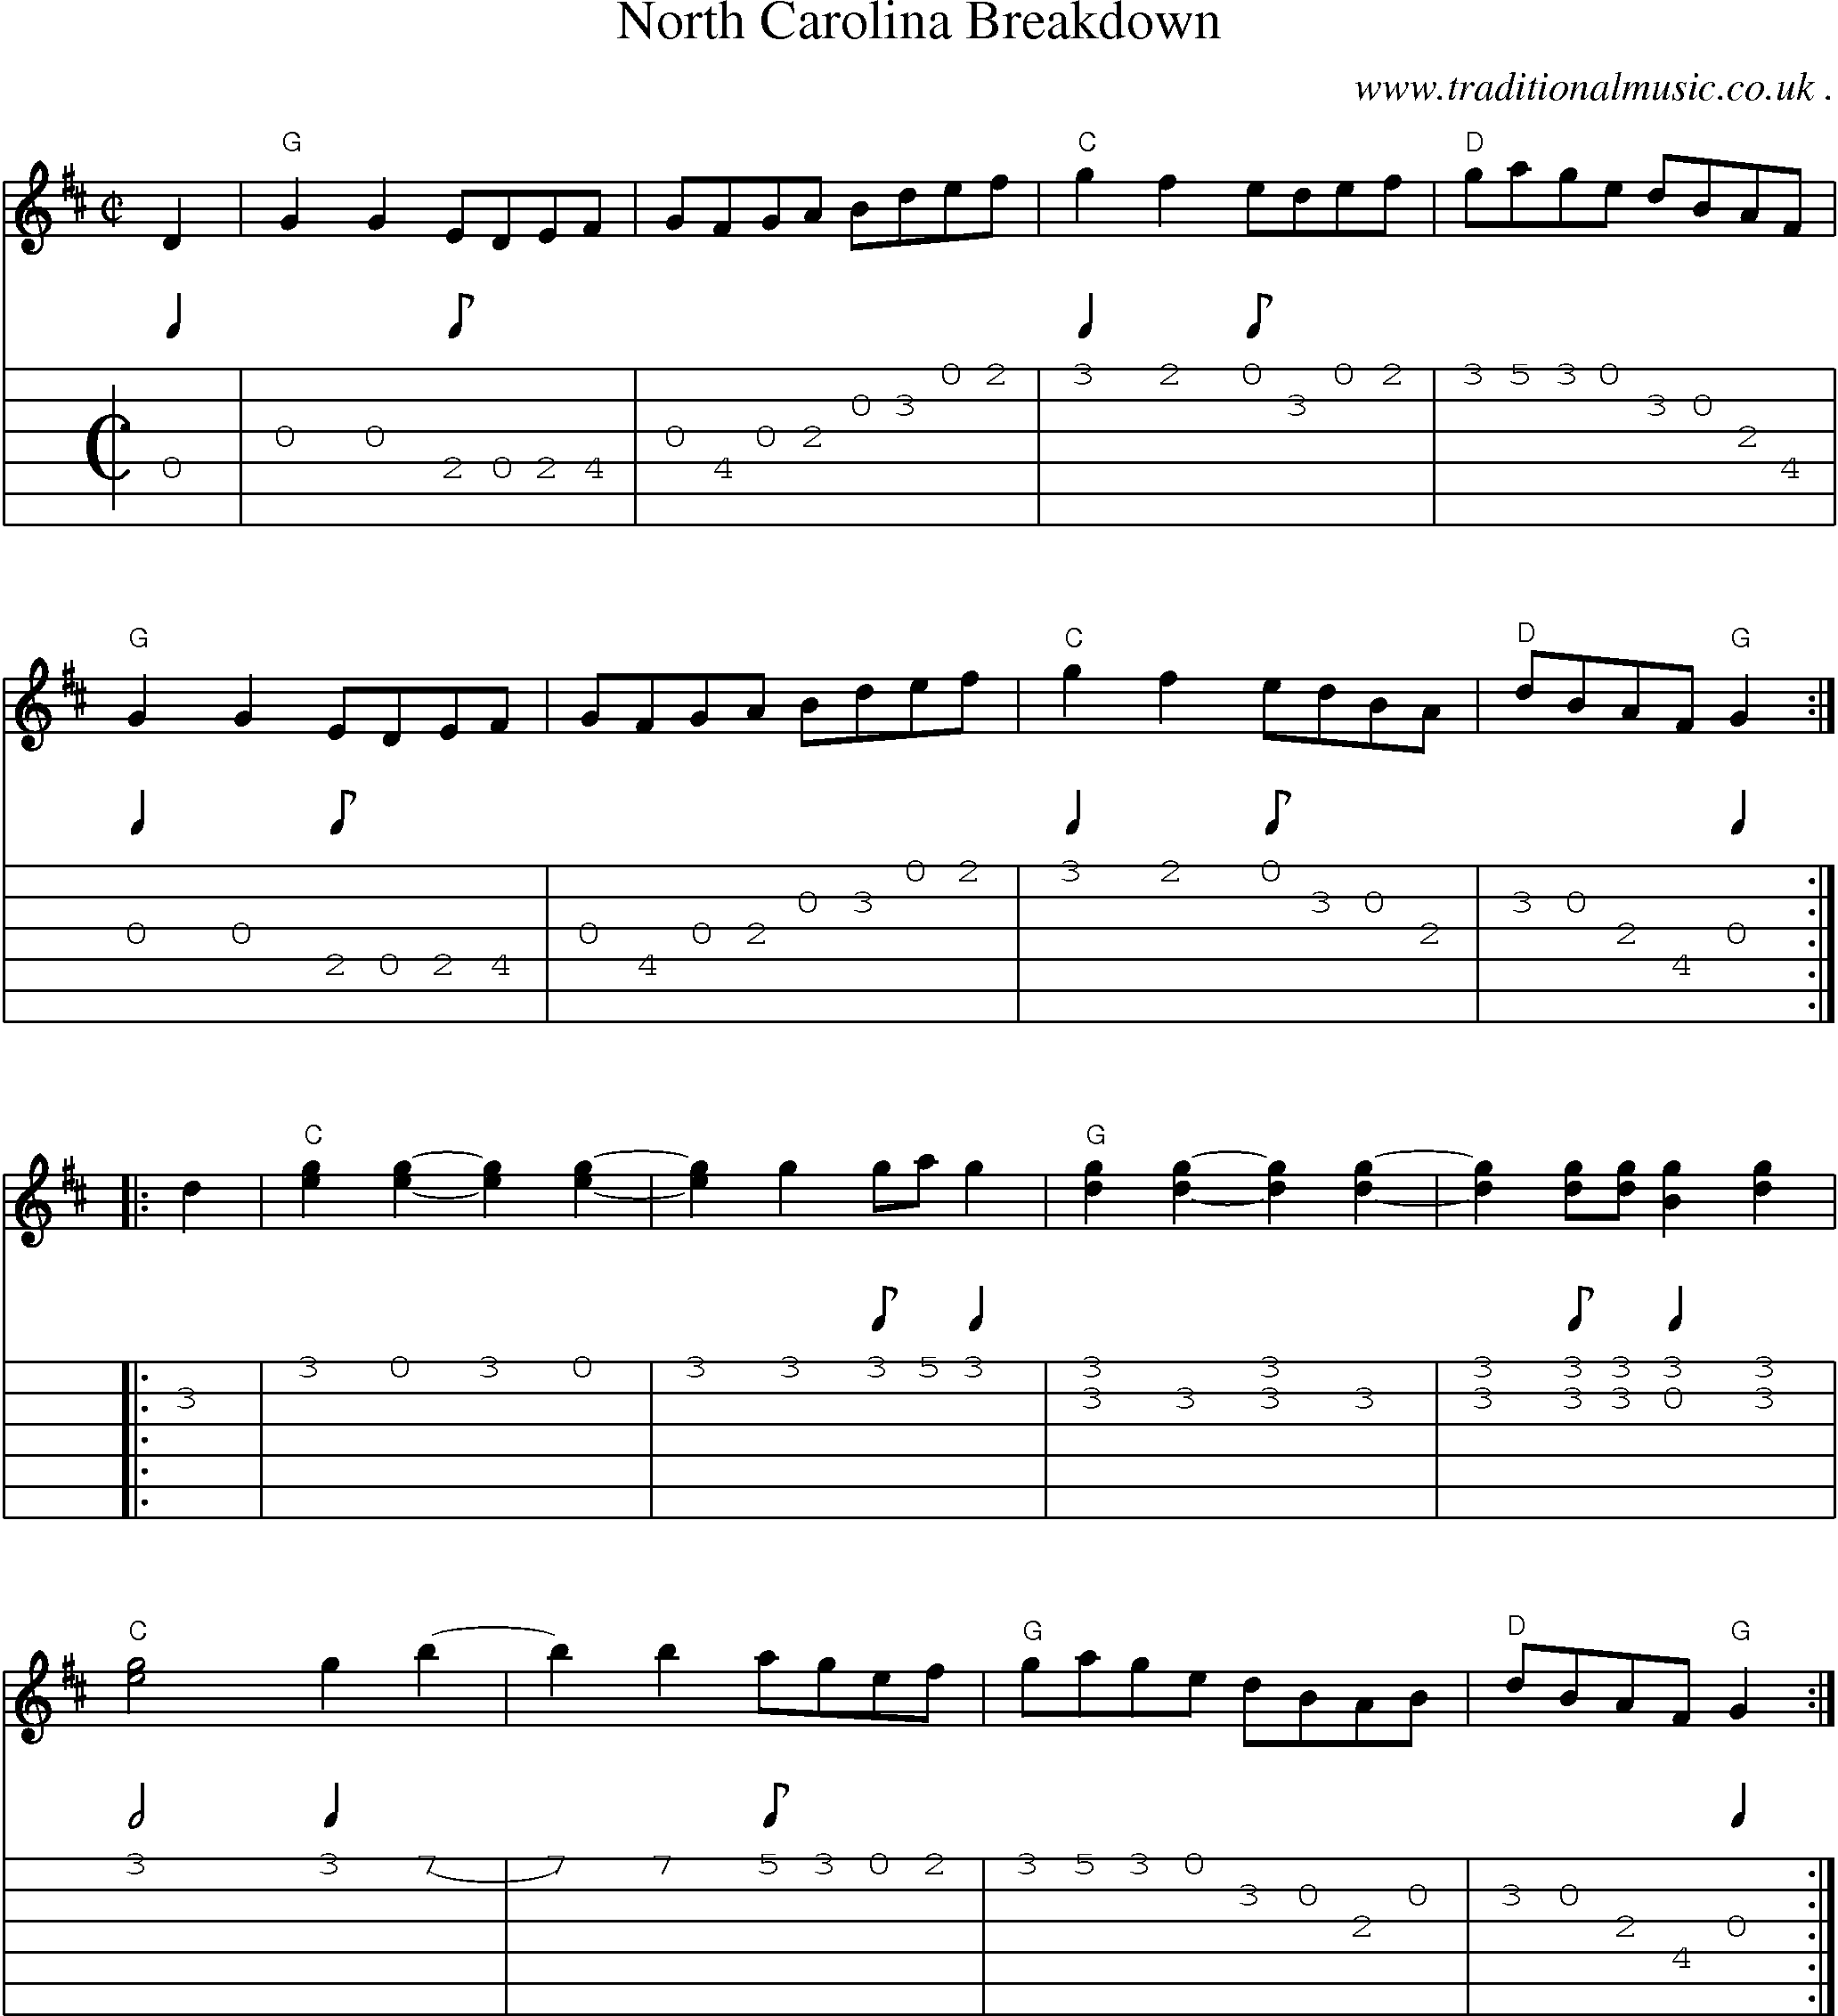 Music Score and Guitar Tabs for North Carolina Breakdown